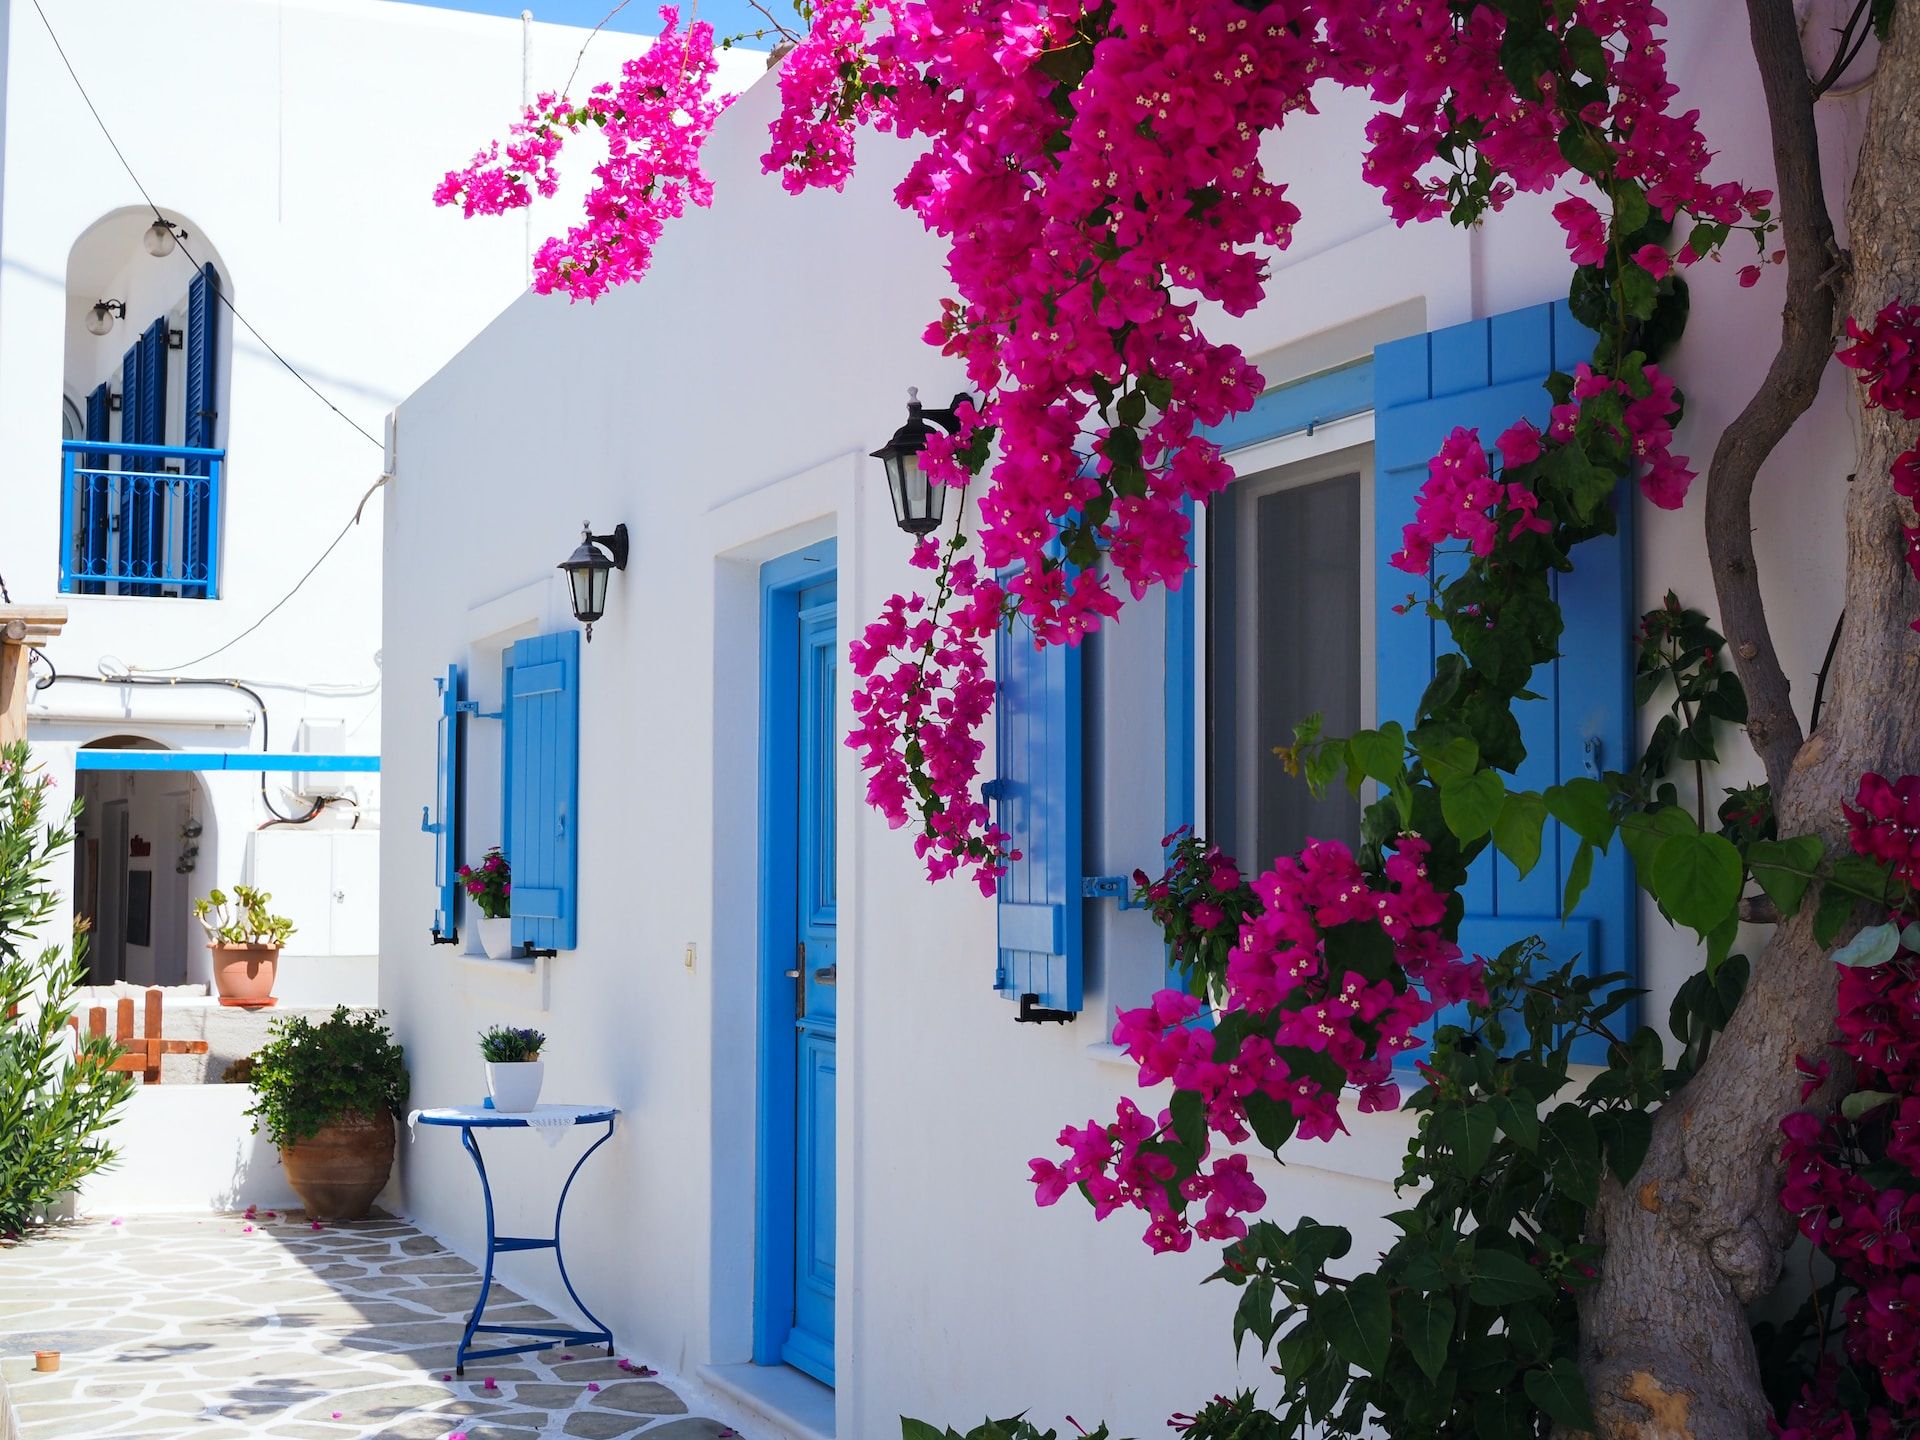 Flowers and blue doors in Greece